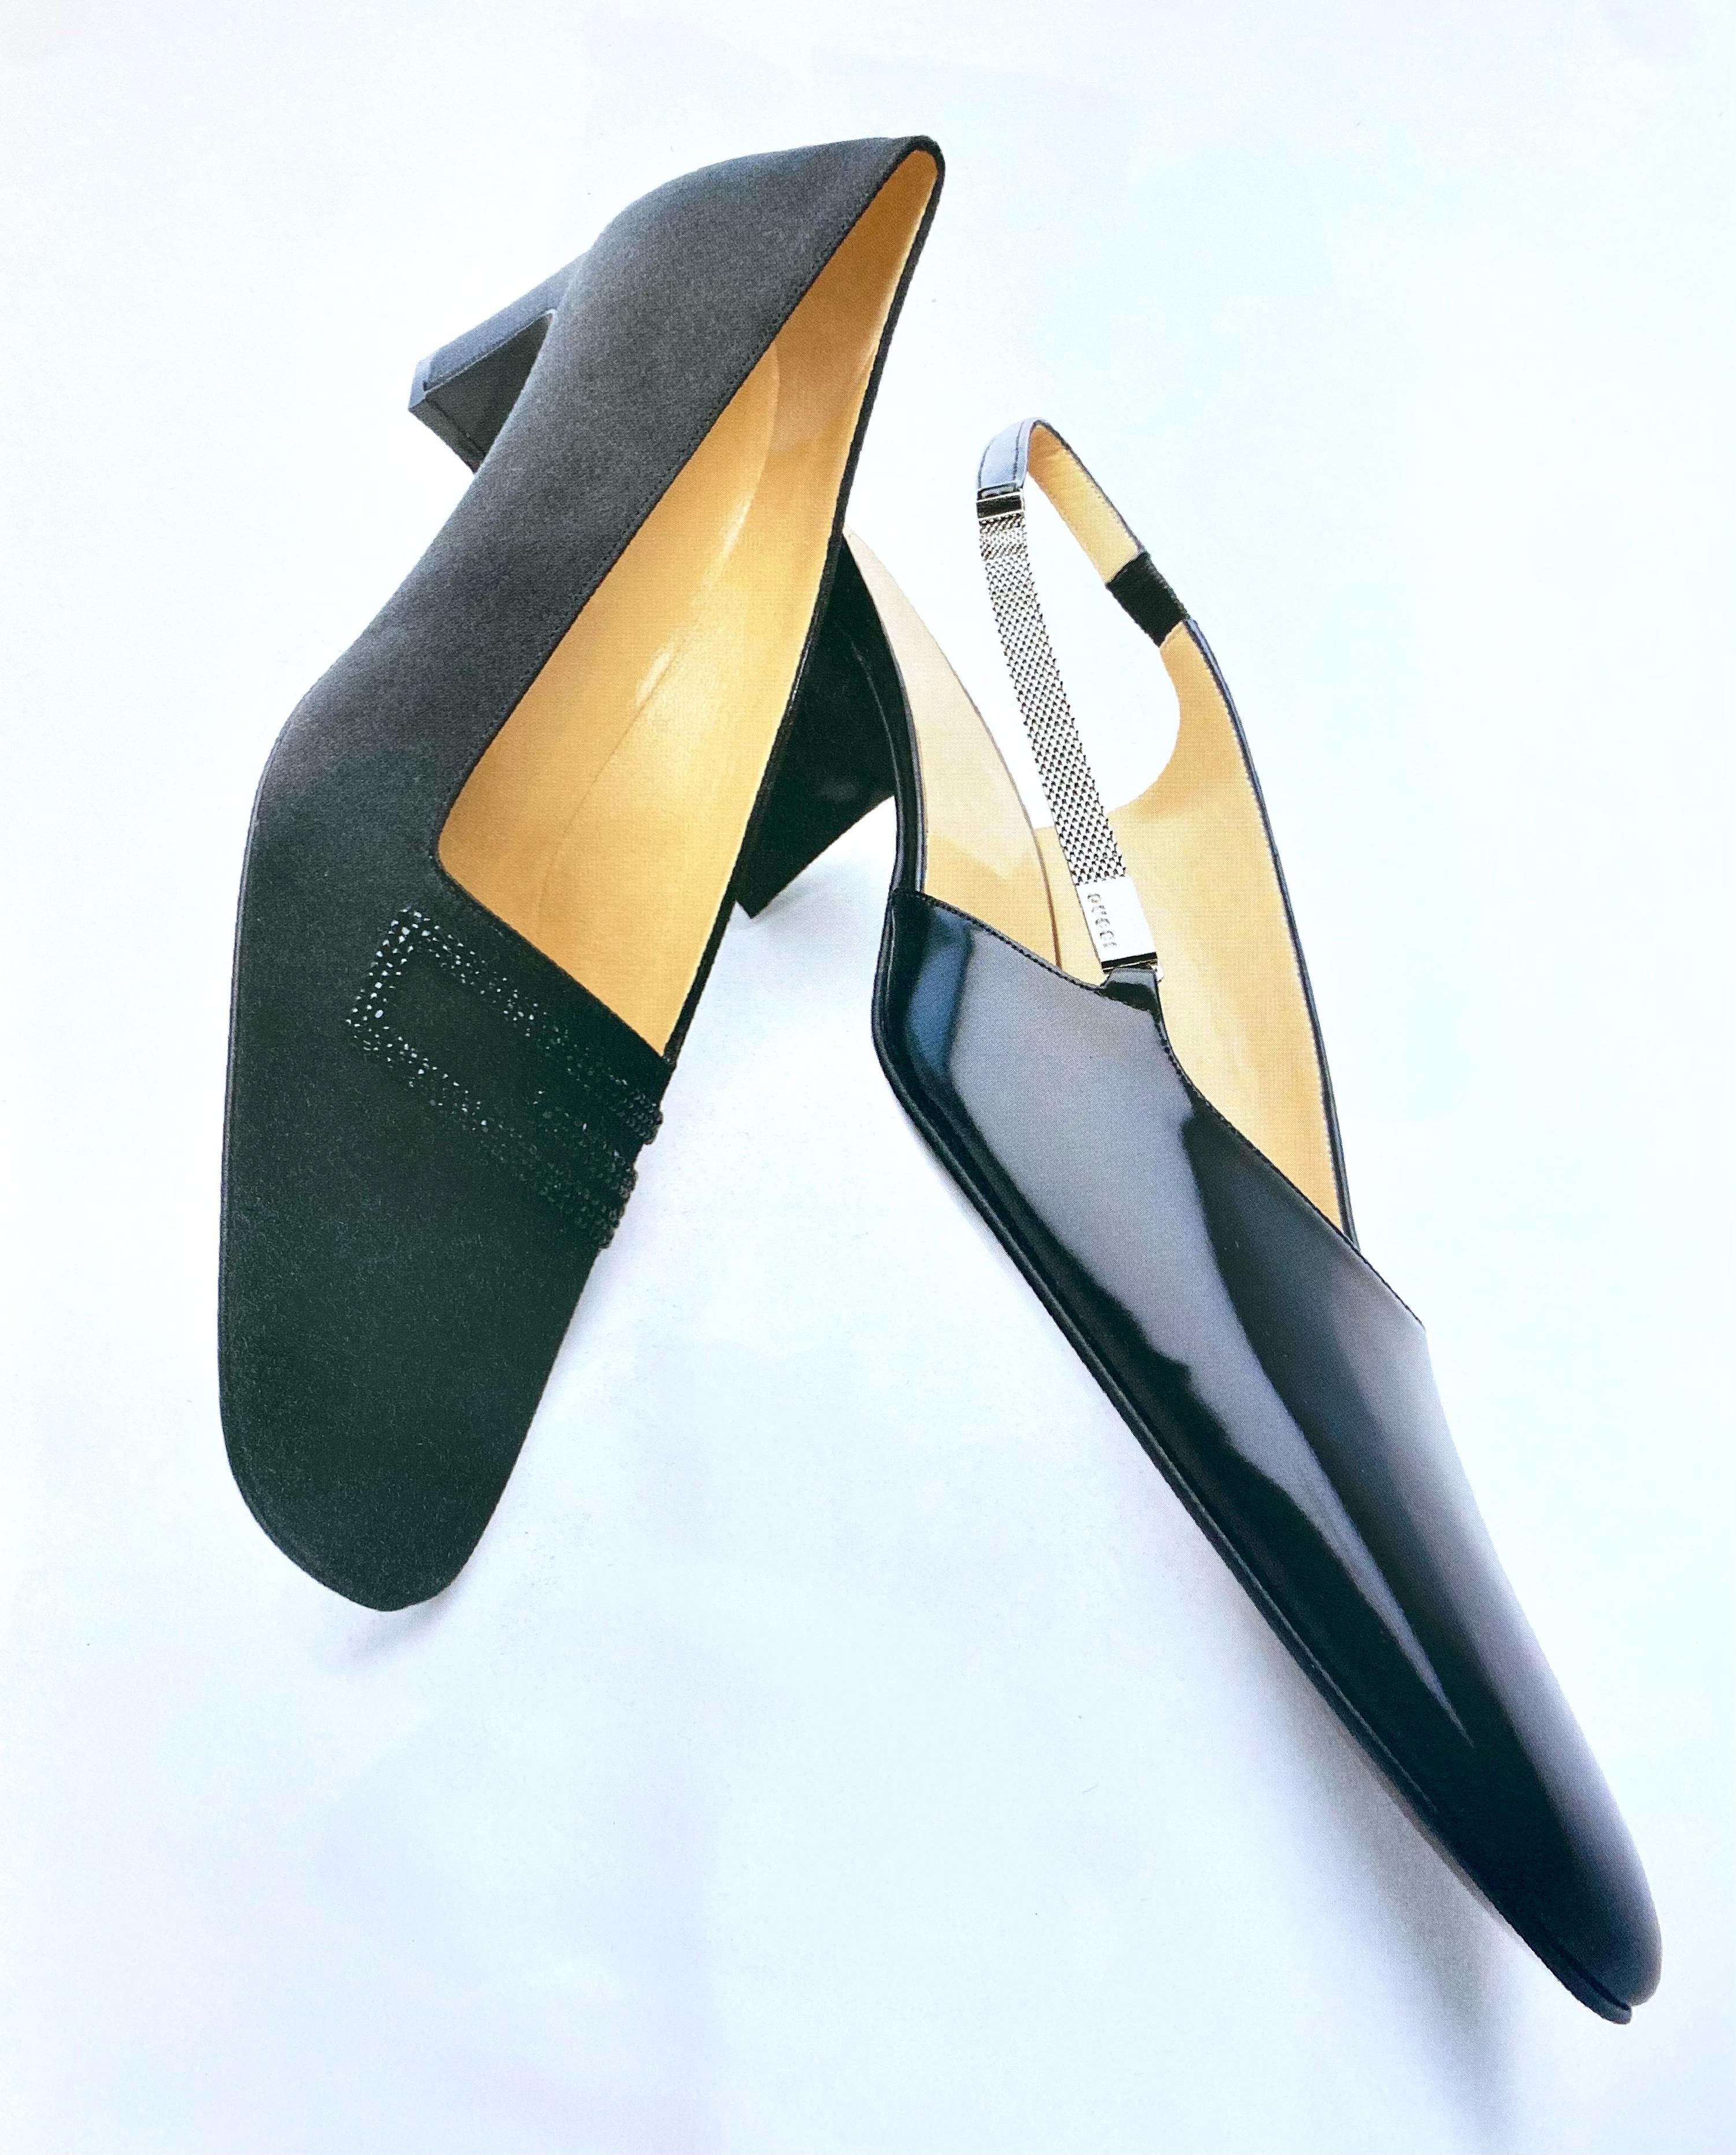 Presenting a black satin square 'G' Gucci beaded kitten heel, designed by Tom Ford. From the Fall/Winter 1996 collection, these classic heels are amped up with a subtle sparkling square 'G' at the vamp. Step into these rare late 1990s Gucci by Tom